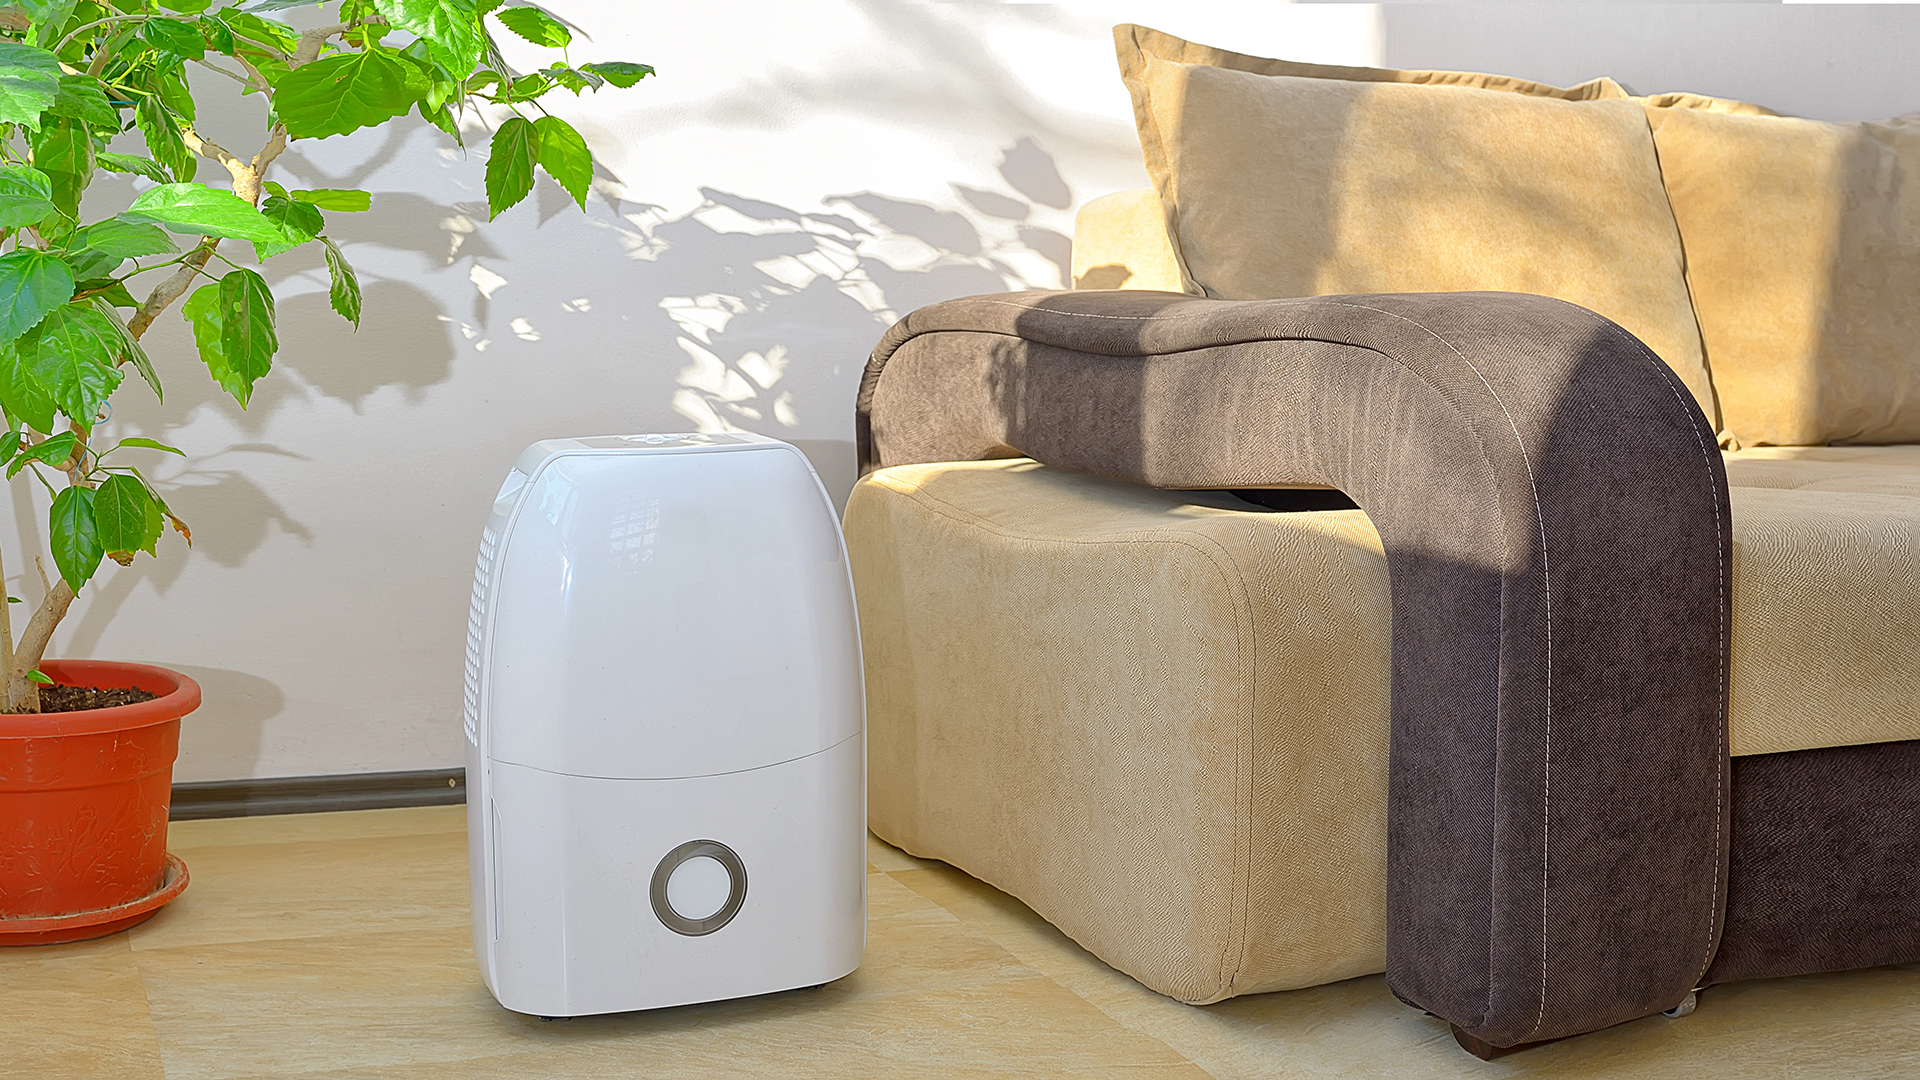 What Is the Difference Between a Humidifier and a Dehumidifier?